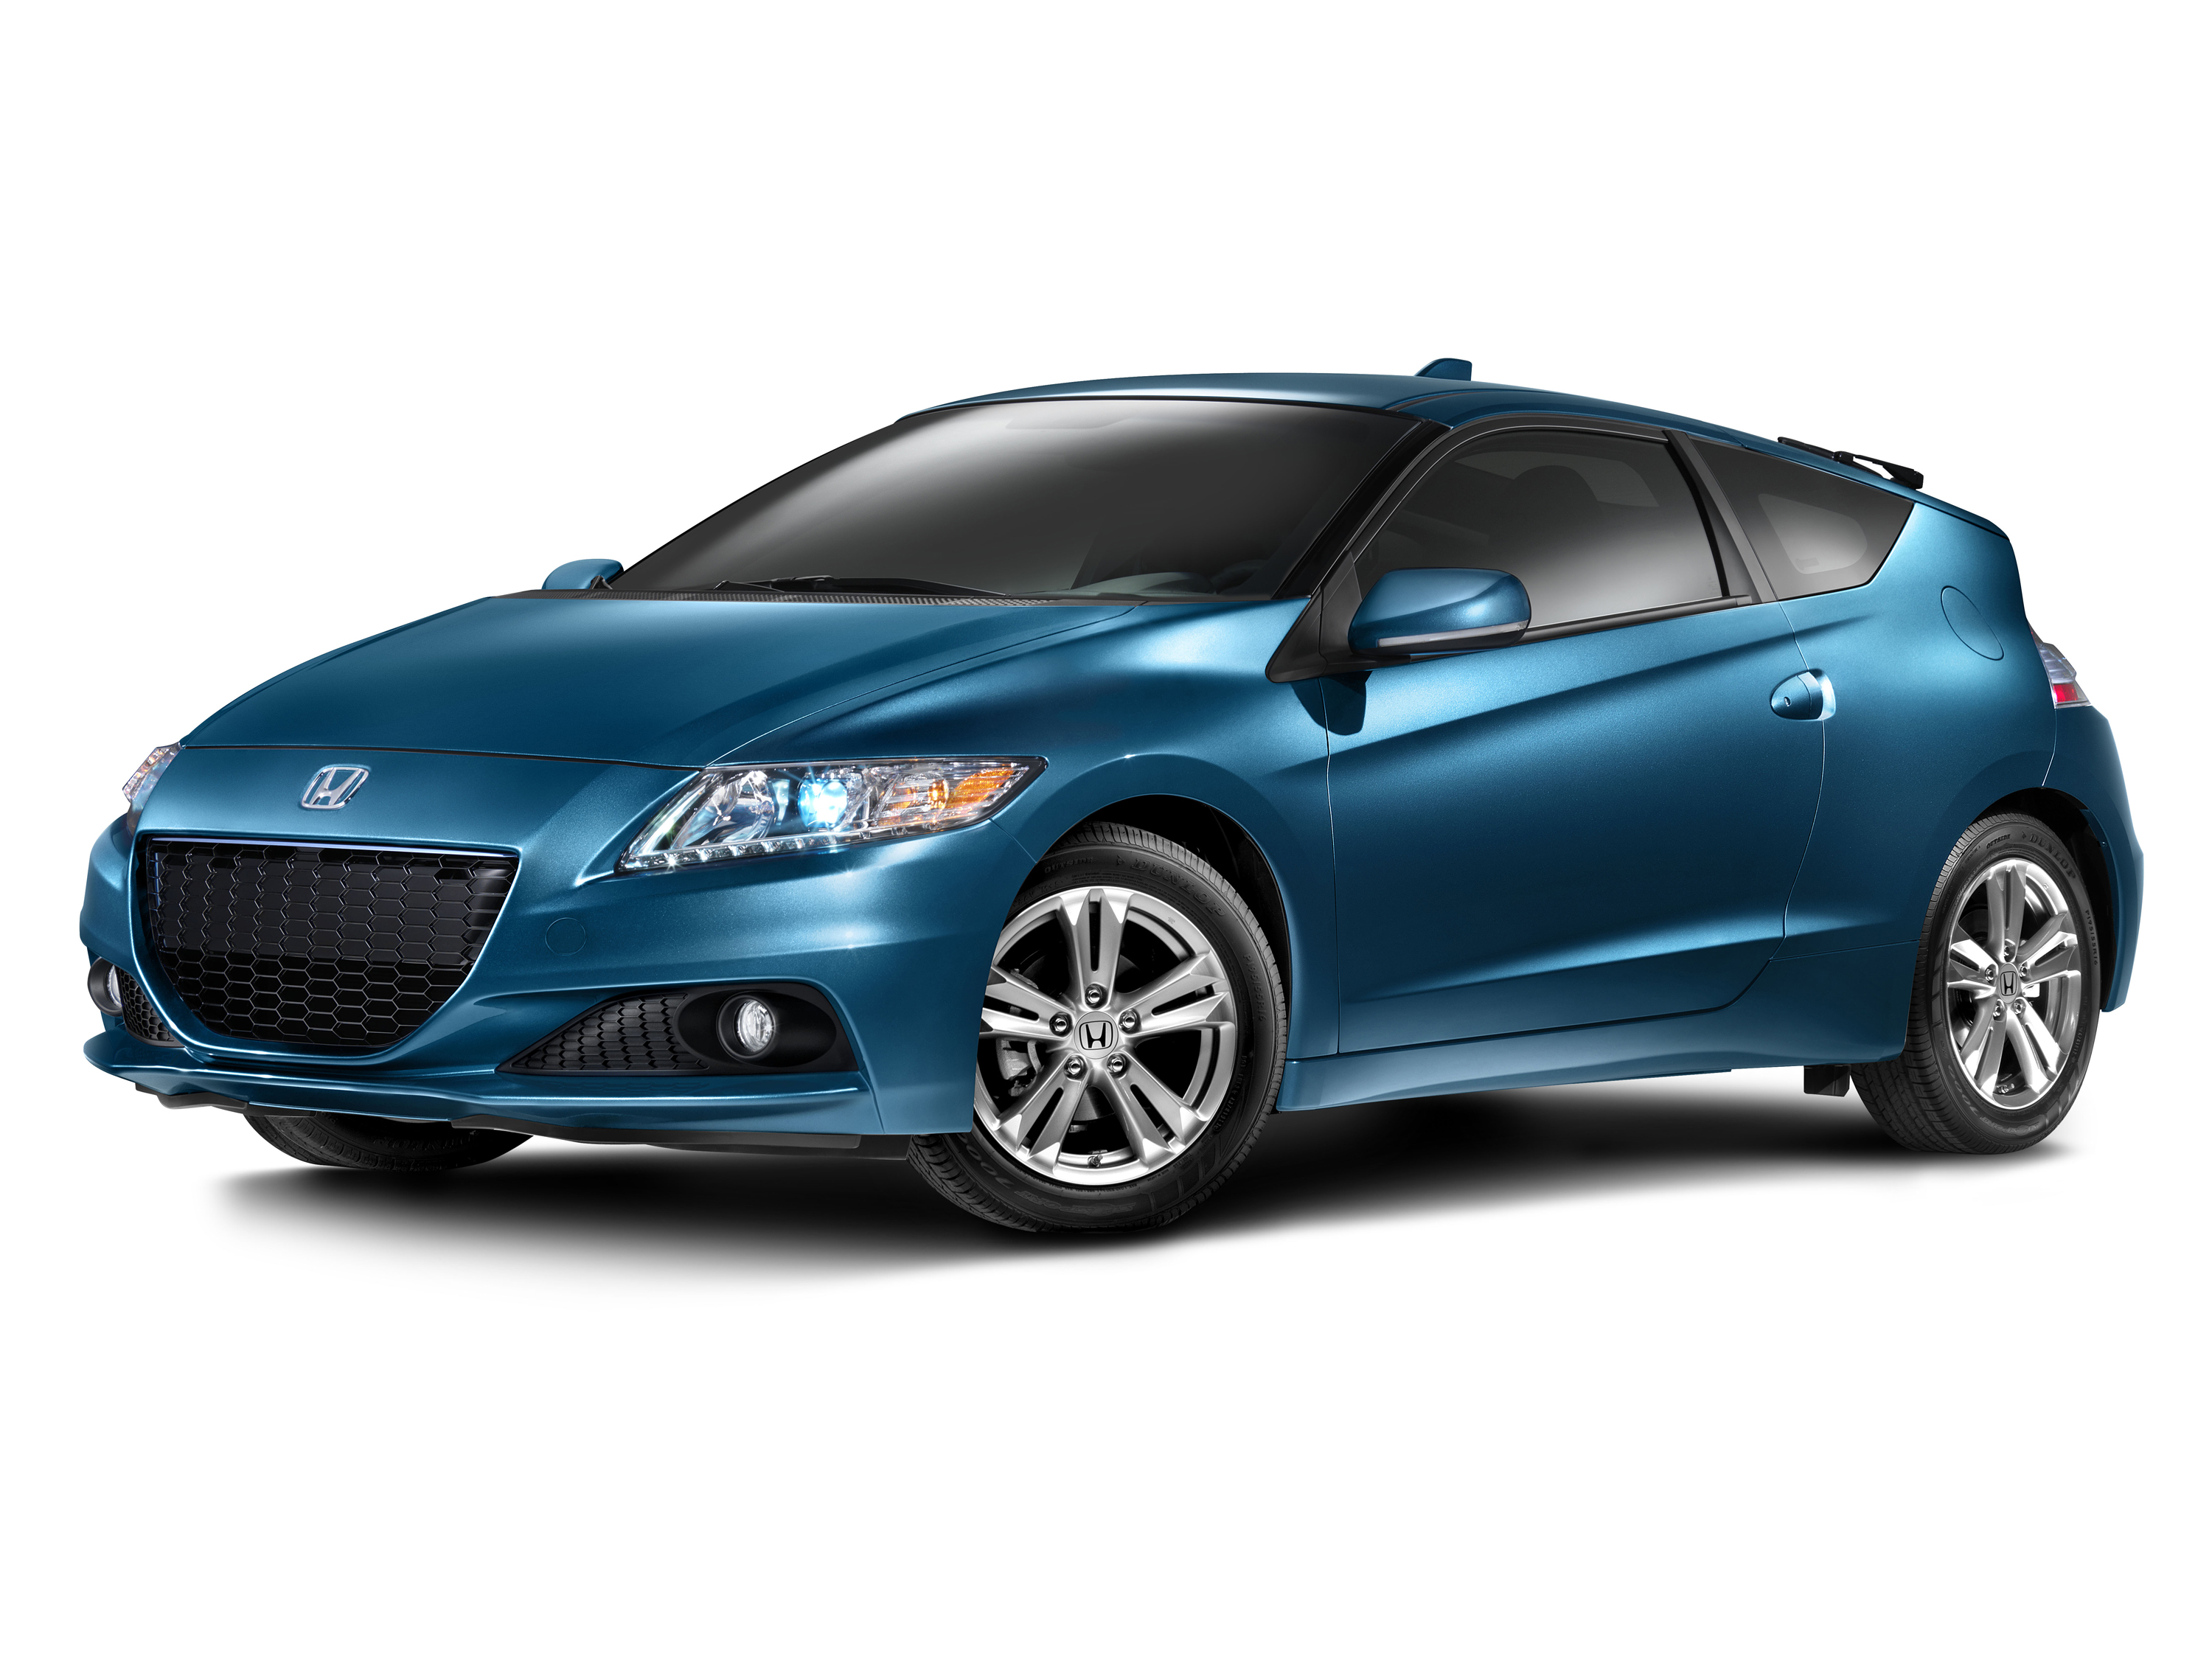 Amazing Honda CR-Z Pictures & Backgrounds